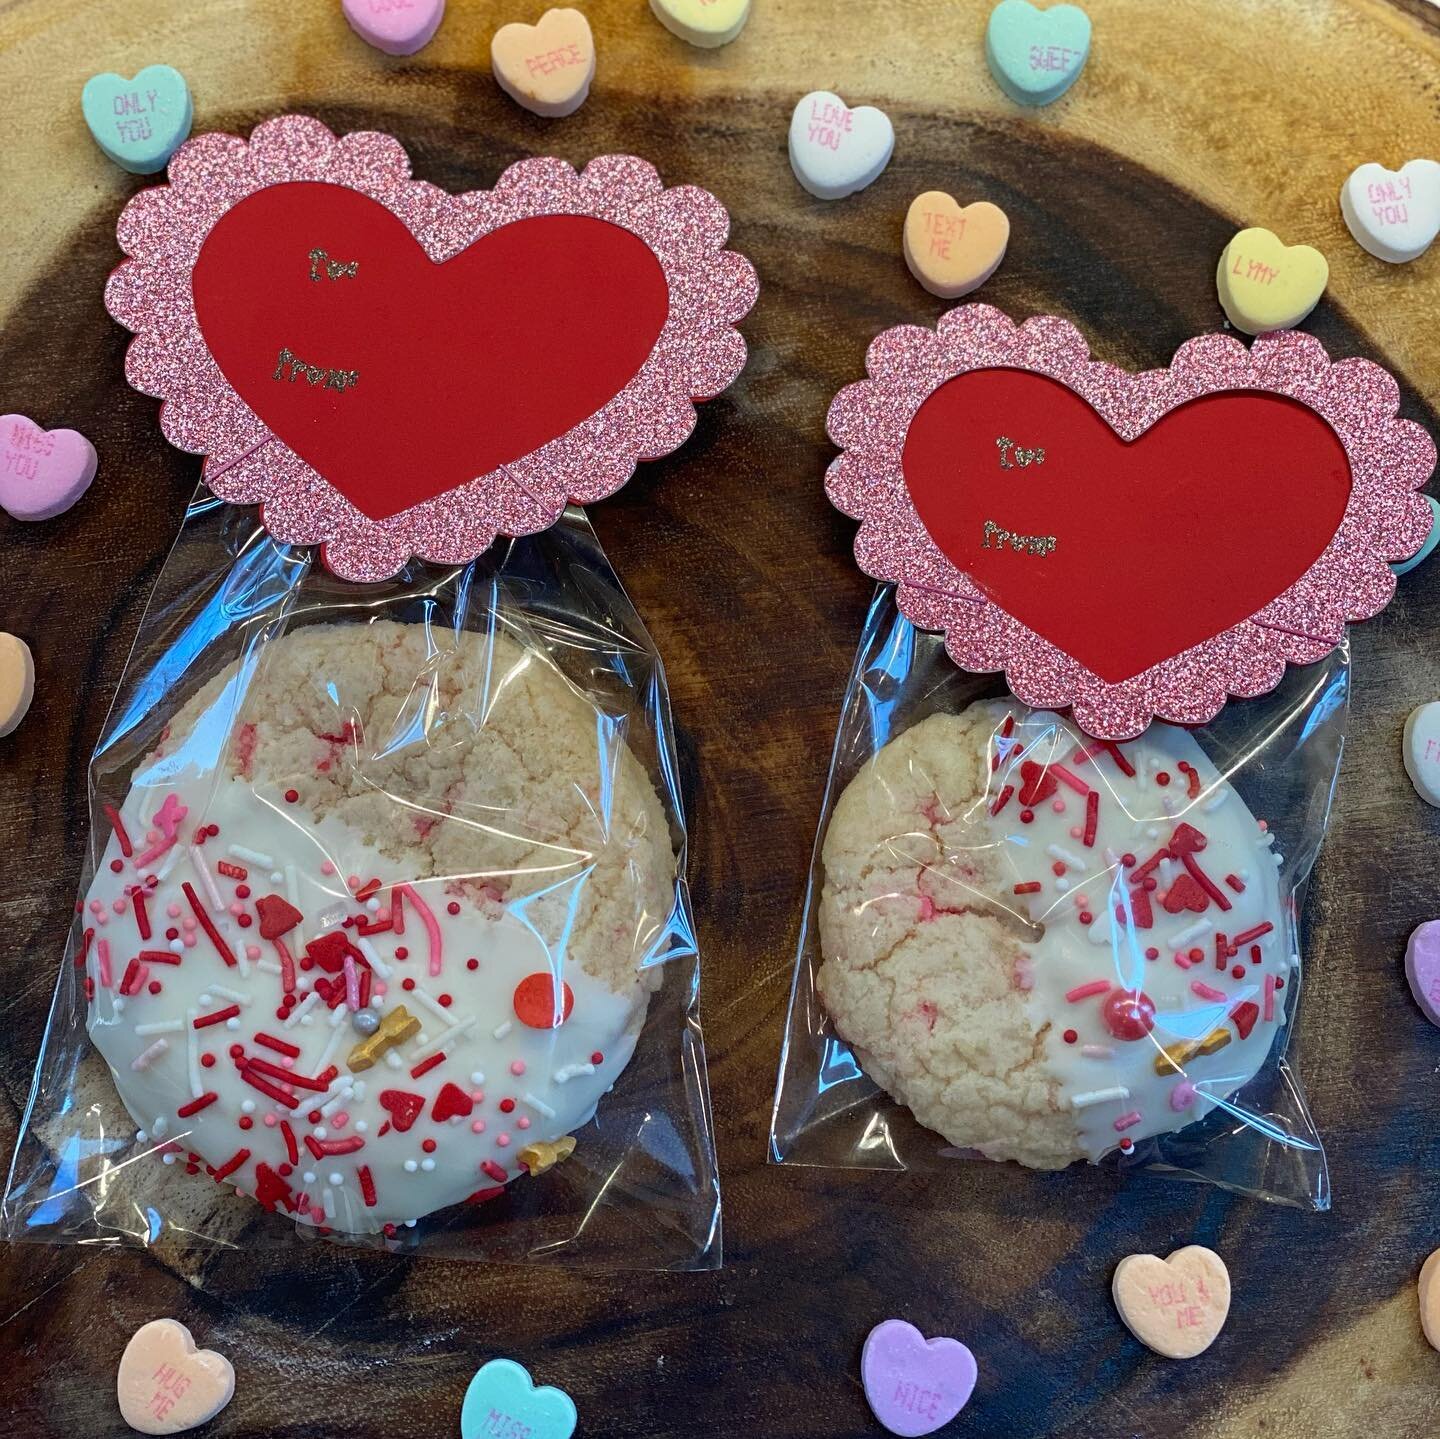 My #valentines products are available for preorder on my website! Link is in my bio. Also we&rsquo;ll be doing Classic Combo Boxes for delivery on 2/4 that include lemon bars!  #cookievalentines #cocoabombs #heartshaped #minicakesfor2 #glazedcakes #h